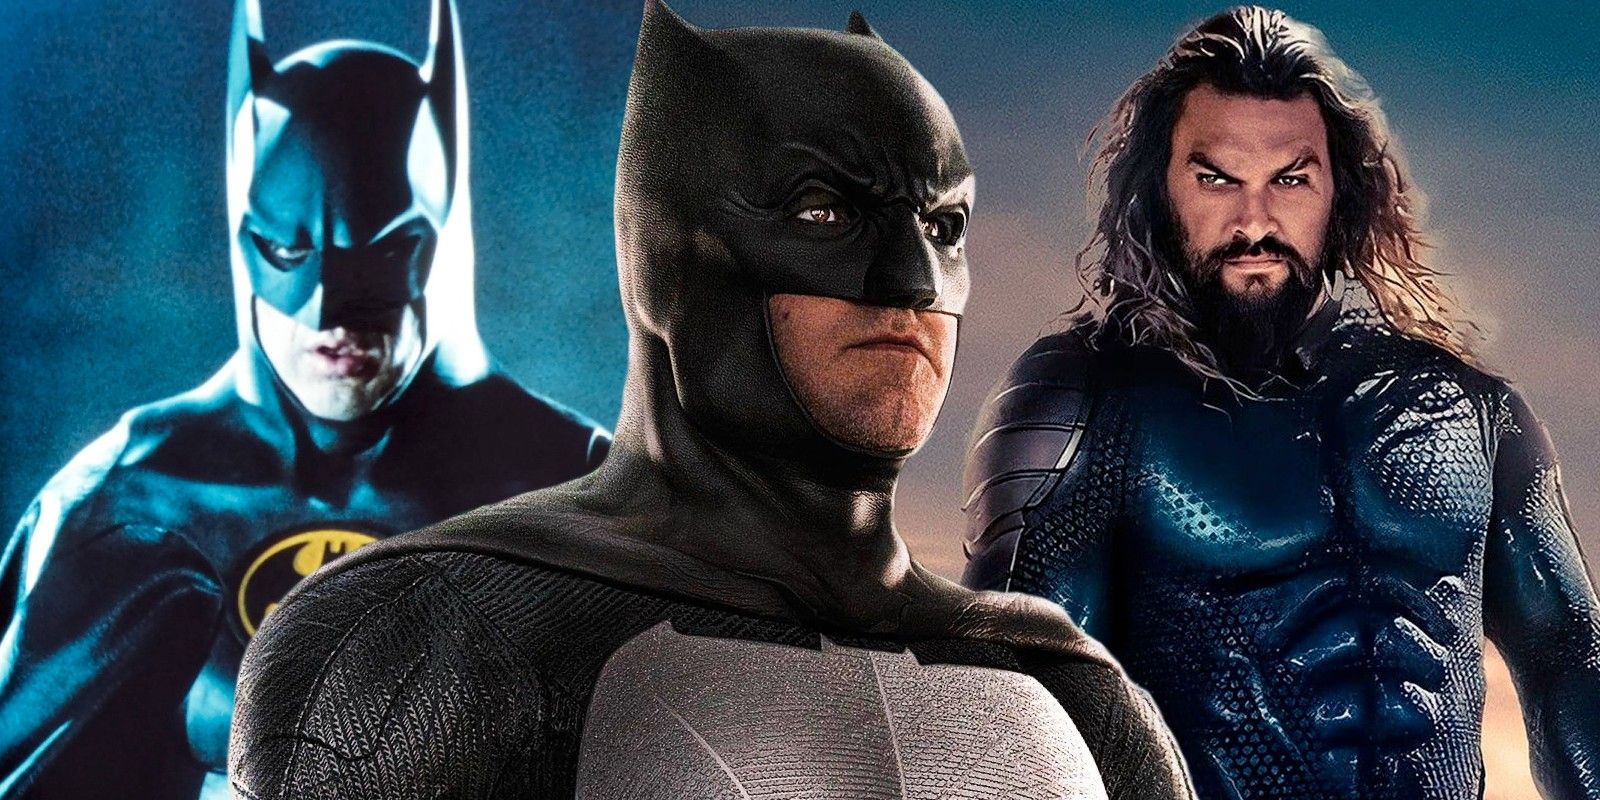 Will Ben Affleck return to play Batman in another post-The Flash DC movie?